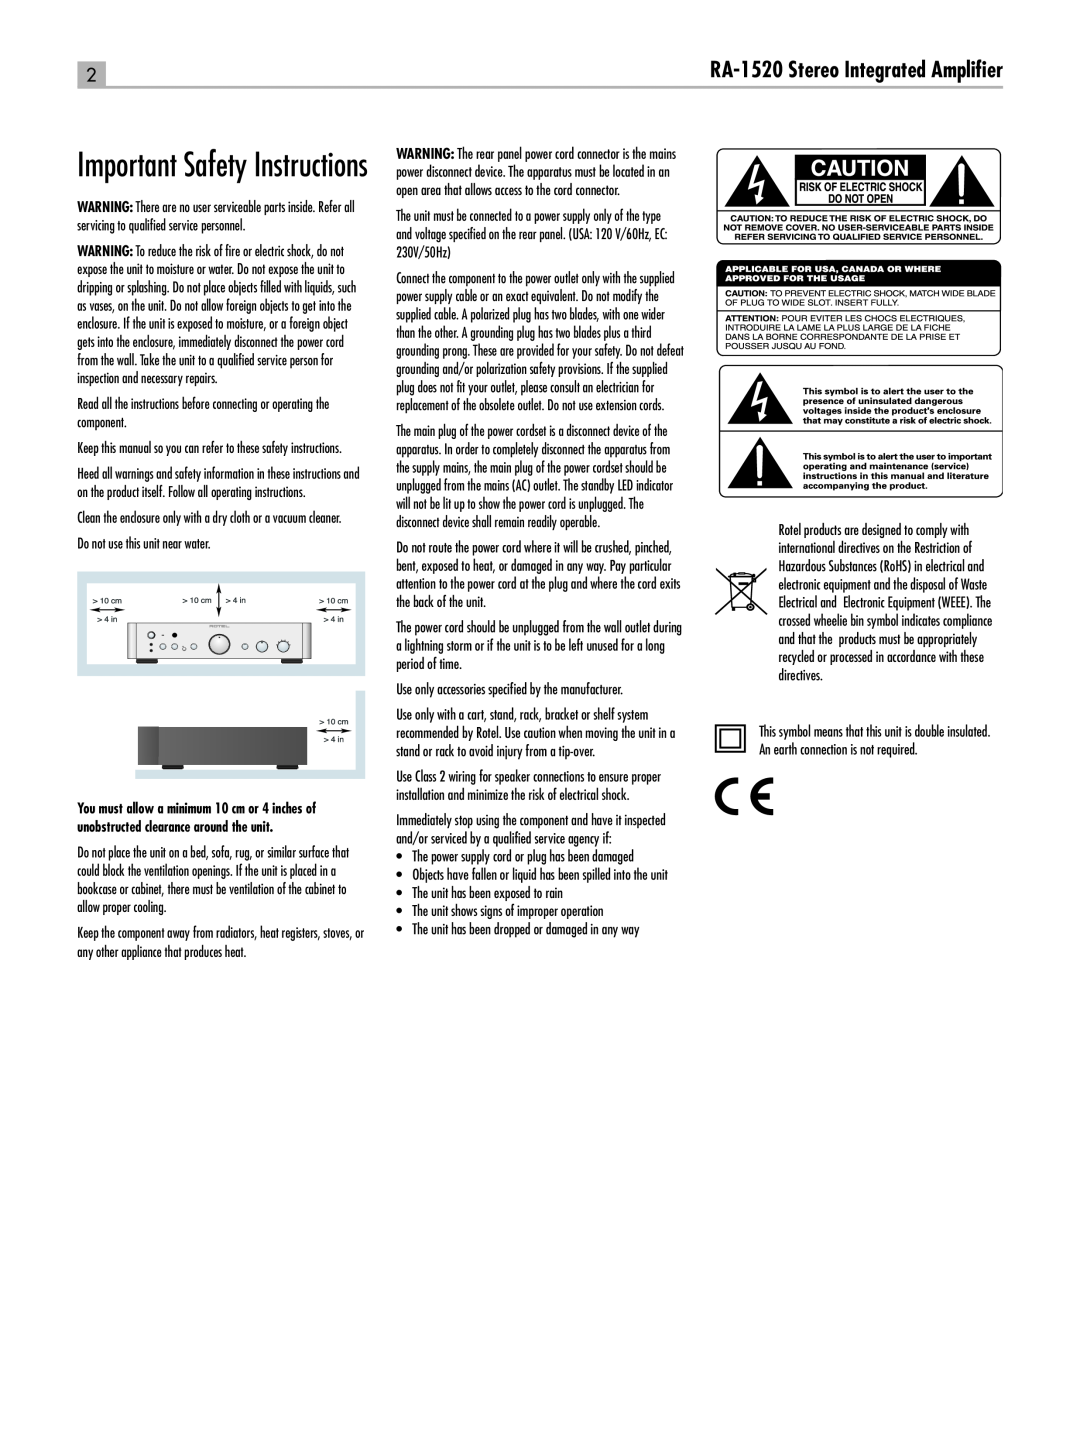 Rotel RA-1520 owner manual Important Safety Instructions, RA‑1520 Stereo Integrated Amplifier 